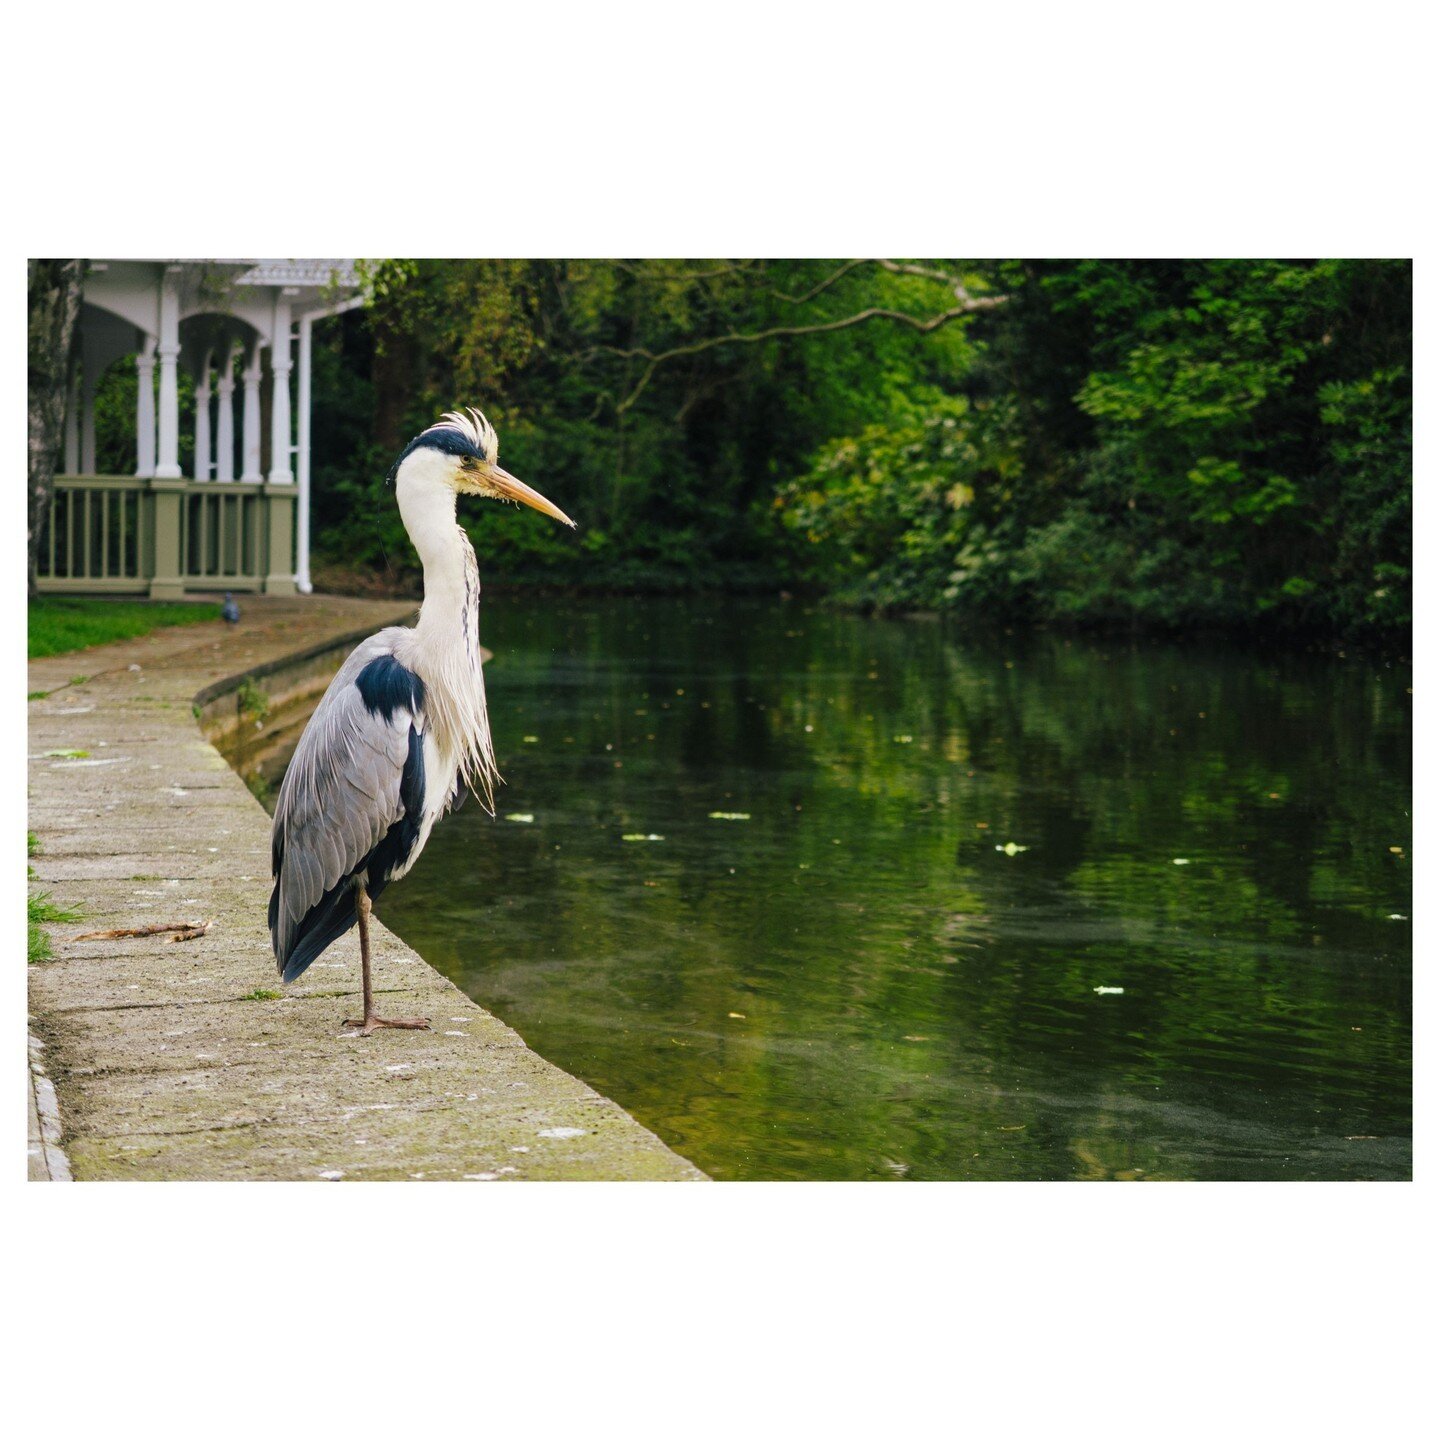 Saw an unusual looking Heron in Stephen's Green this morning. Quite a bit different from the ones you normally see around here. Anyone know what type this is or if it's not native to Ireland? #nature #park #birds #heron #ireland #loveireland